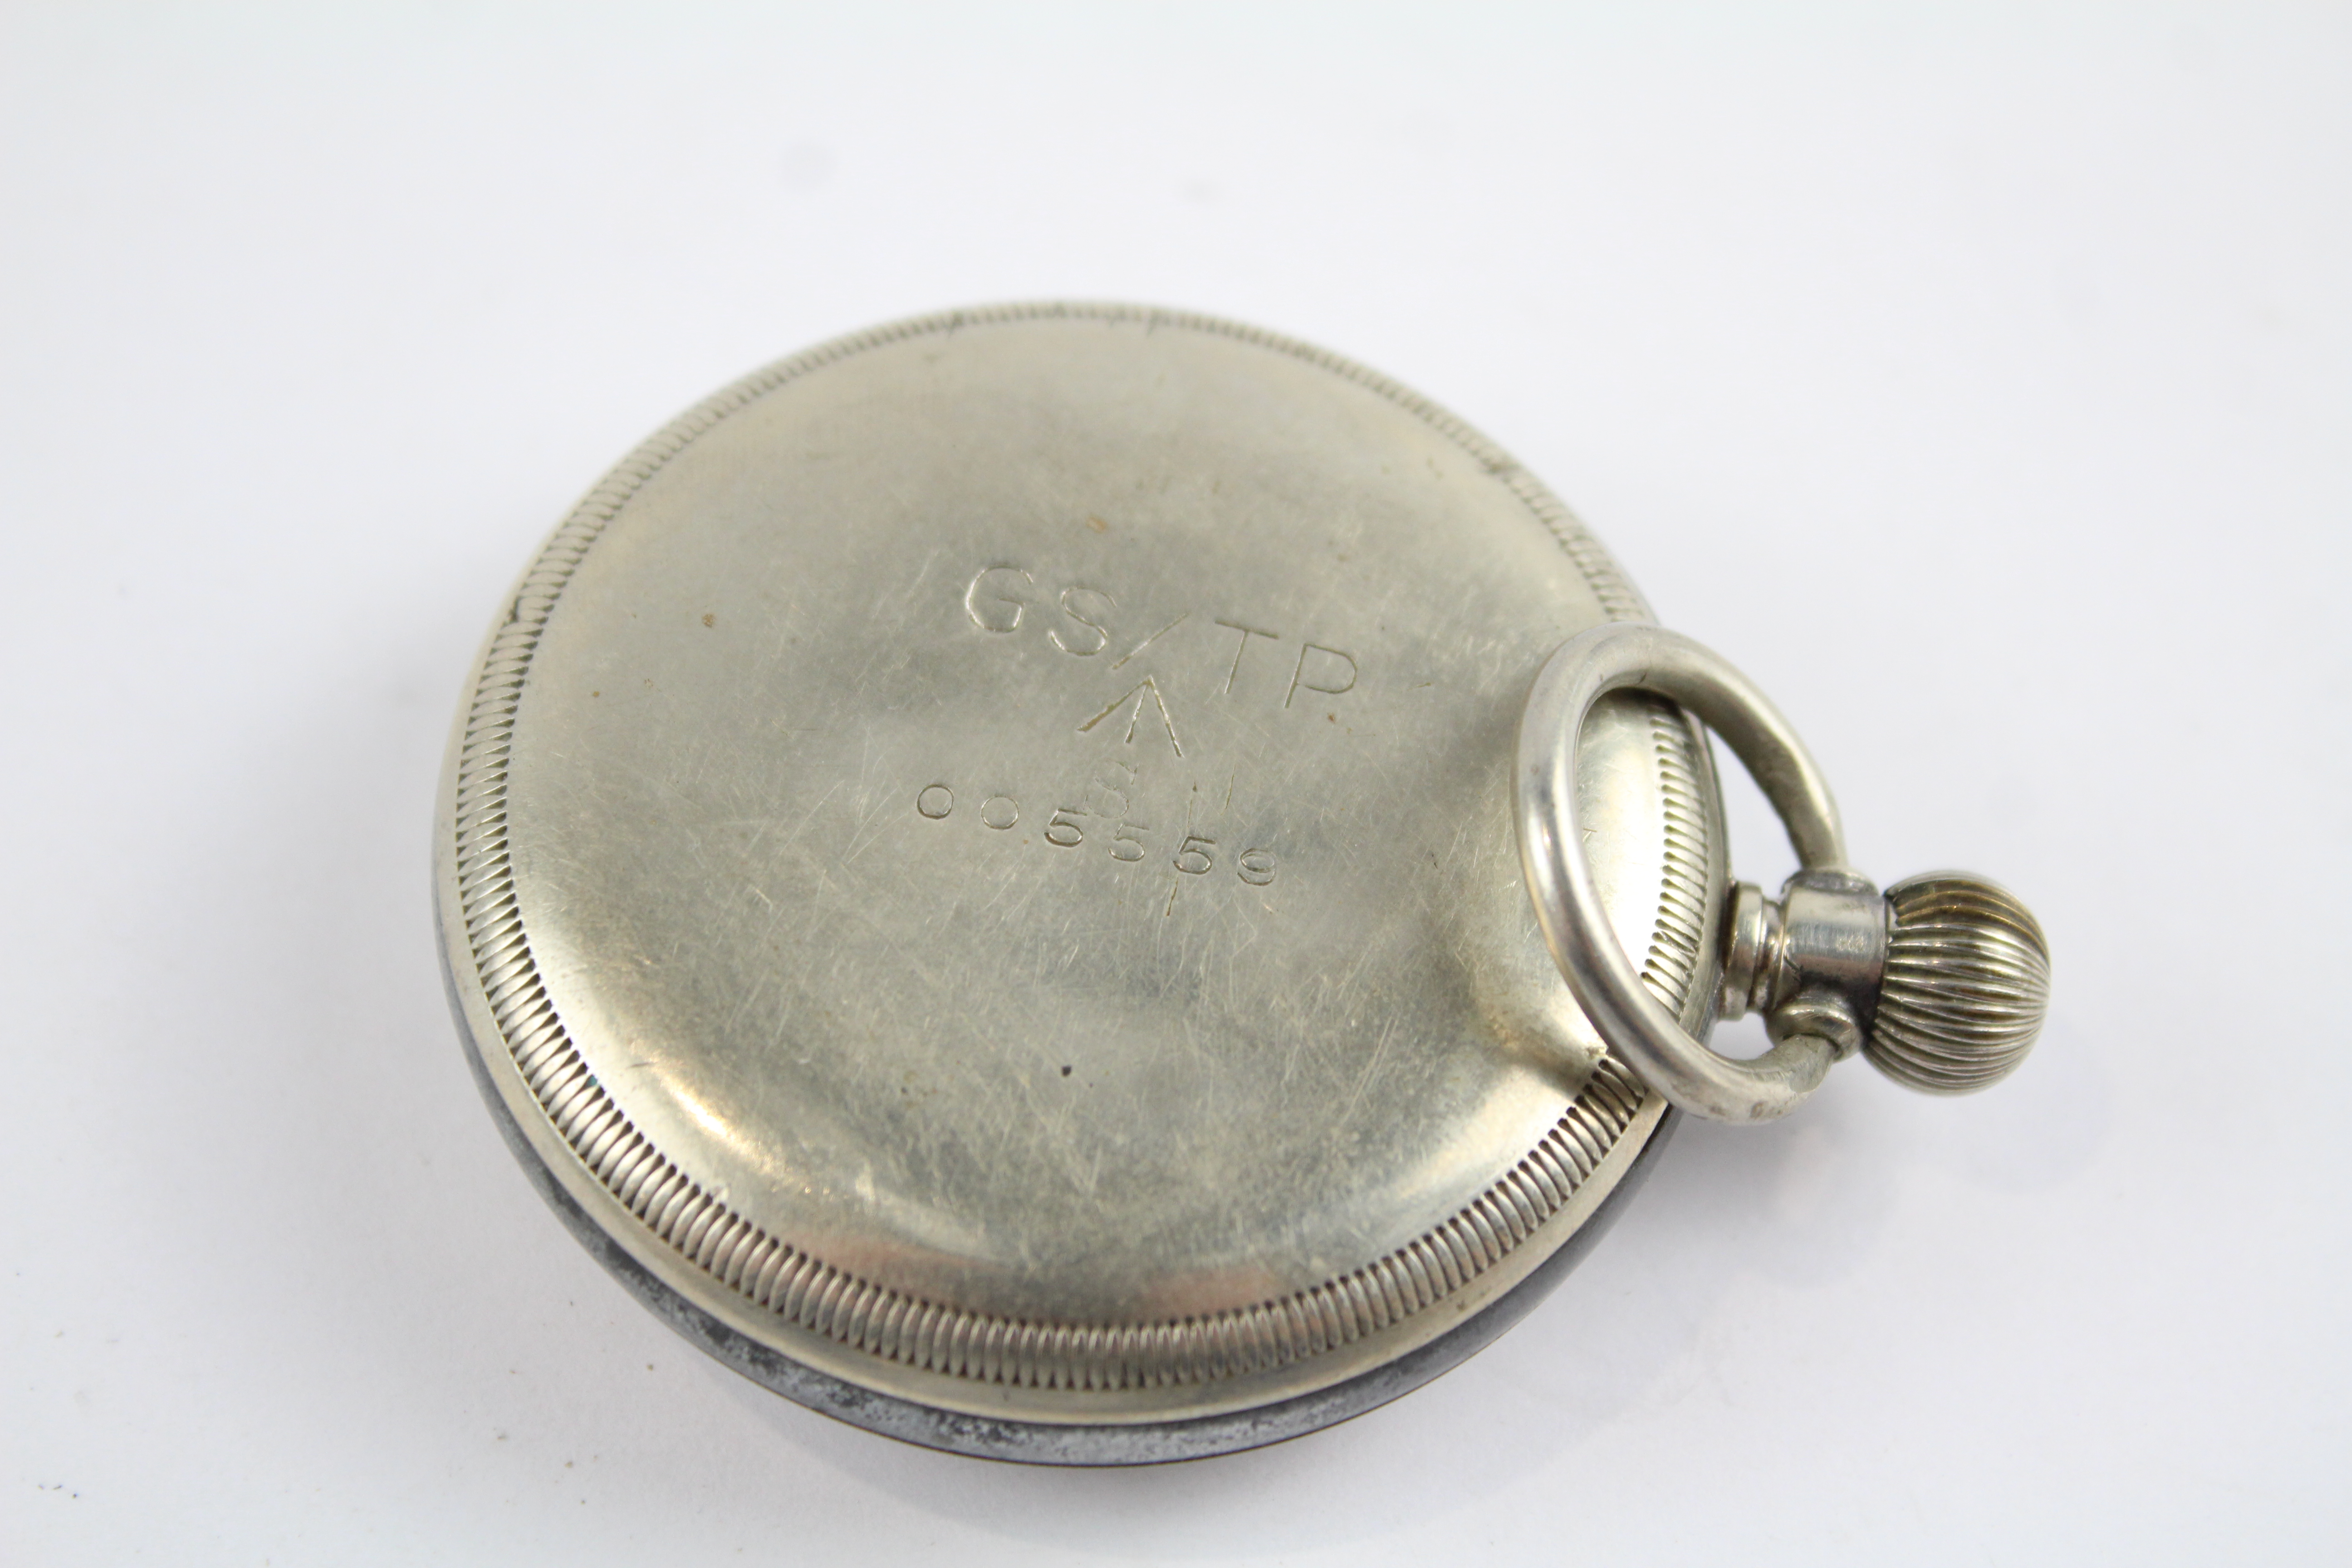 GS/TP Military Issued Gents WWII Era POCKET WATCH Hand-wind WORKING 404869 - Image 4 of 6